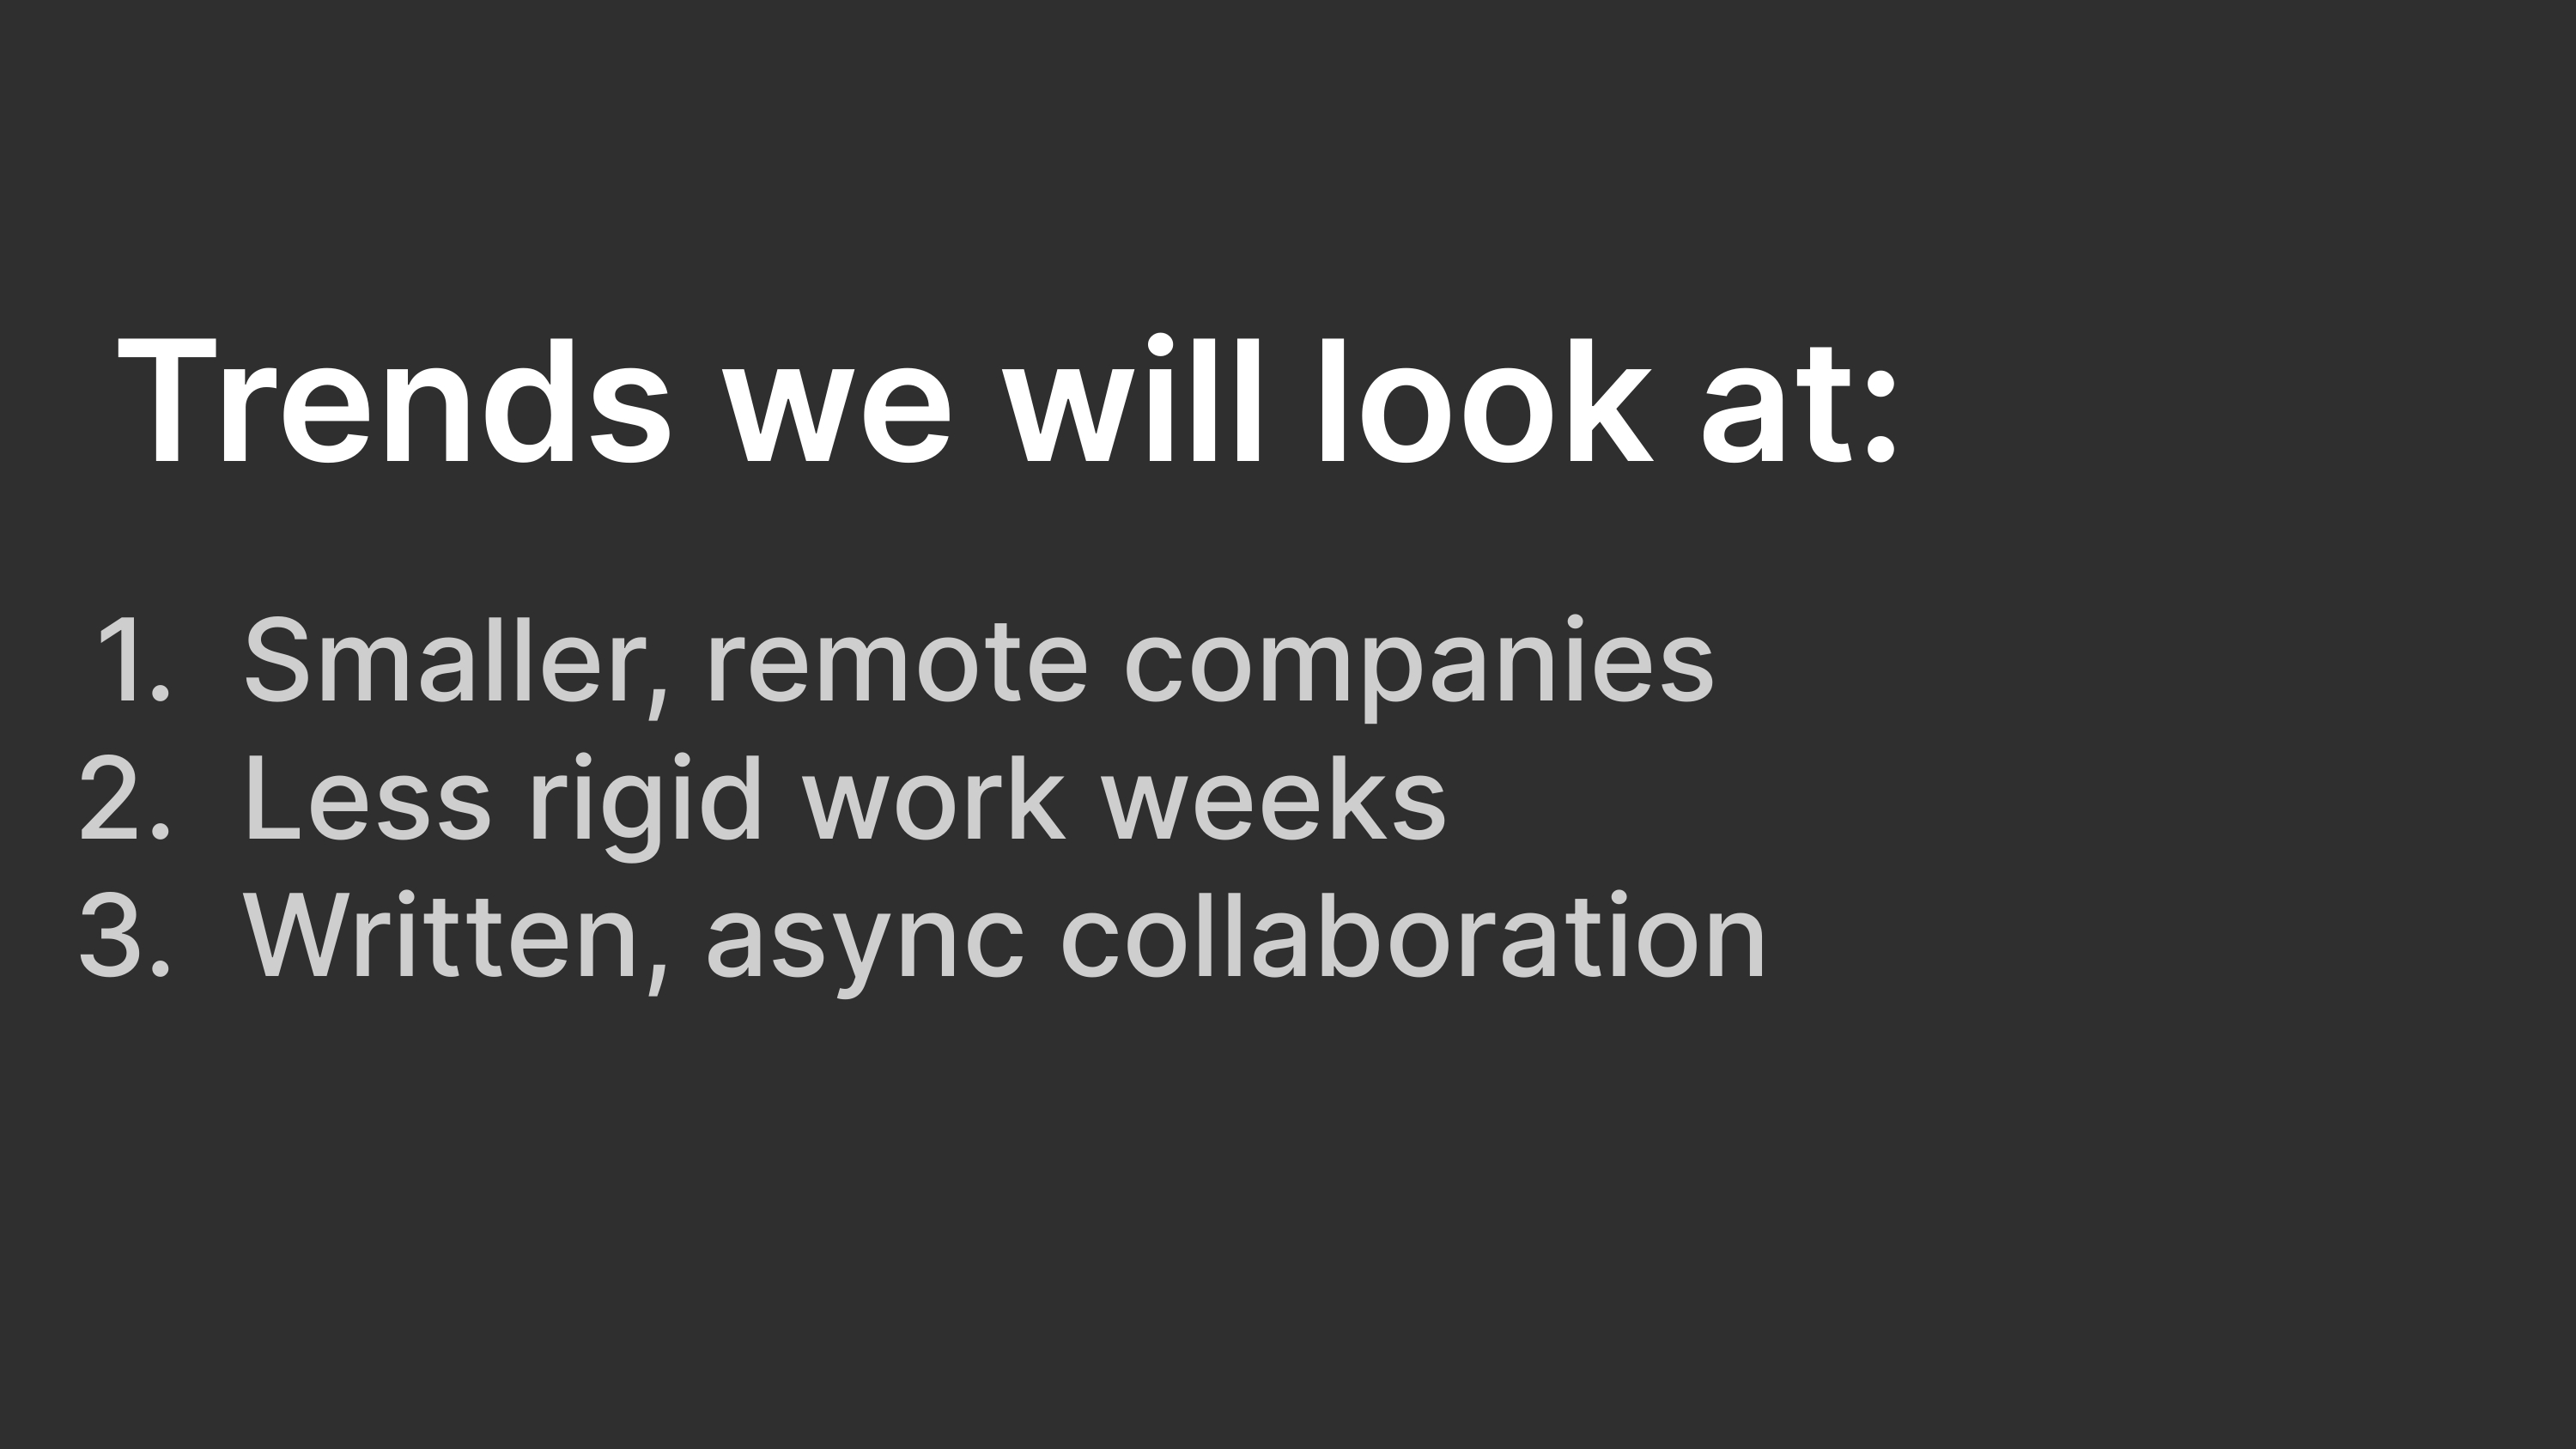 Trends we will look at today: Smaller, remote companies; less rigid work weeks; written, async collaboration.